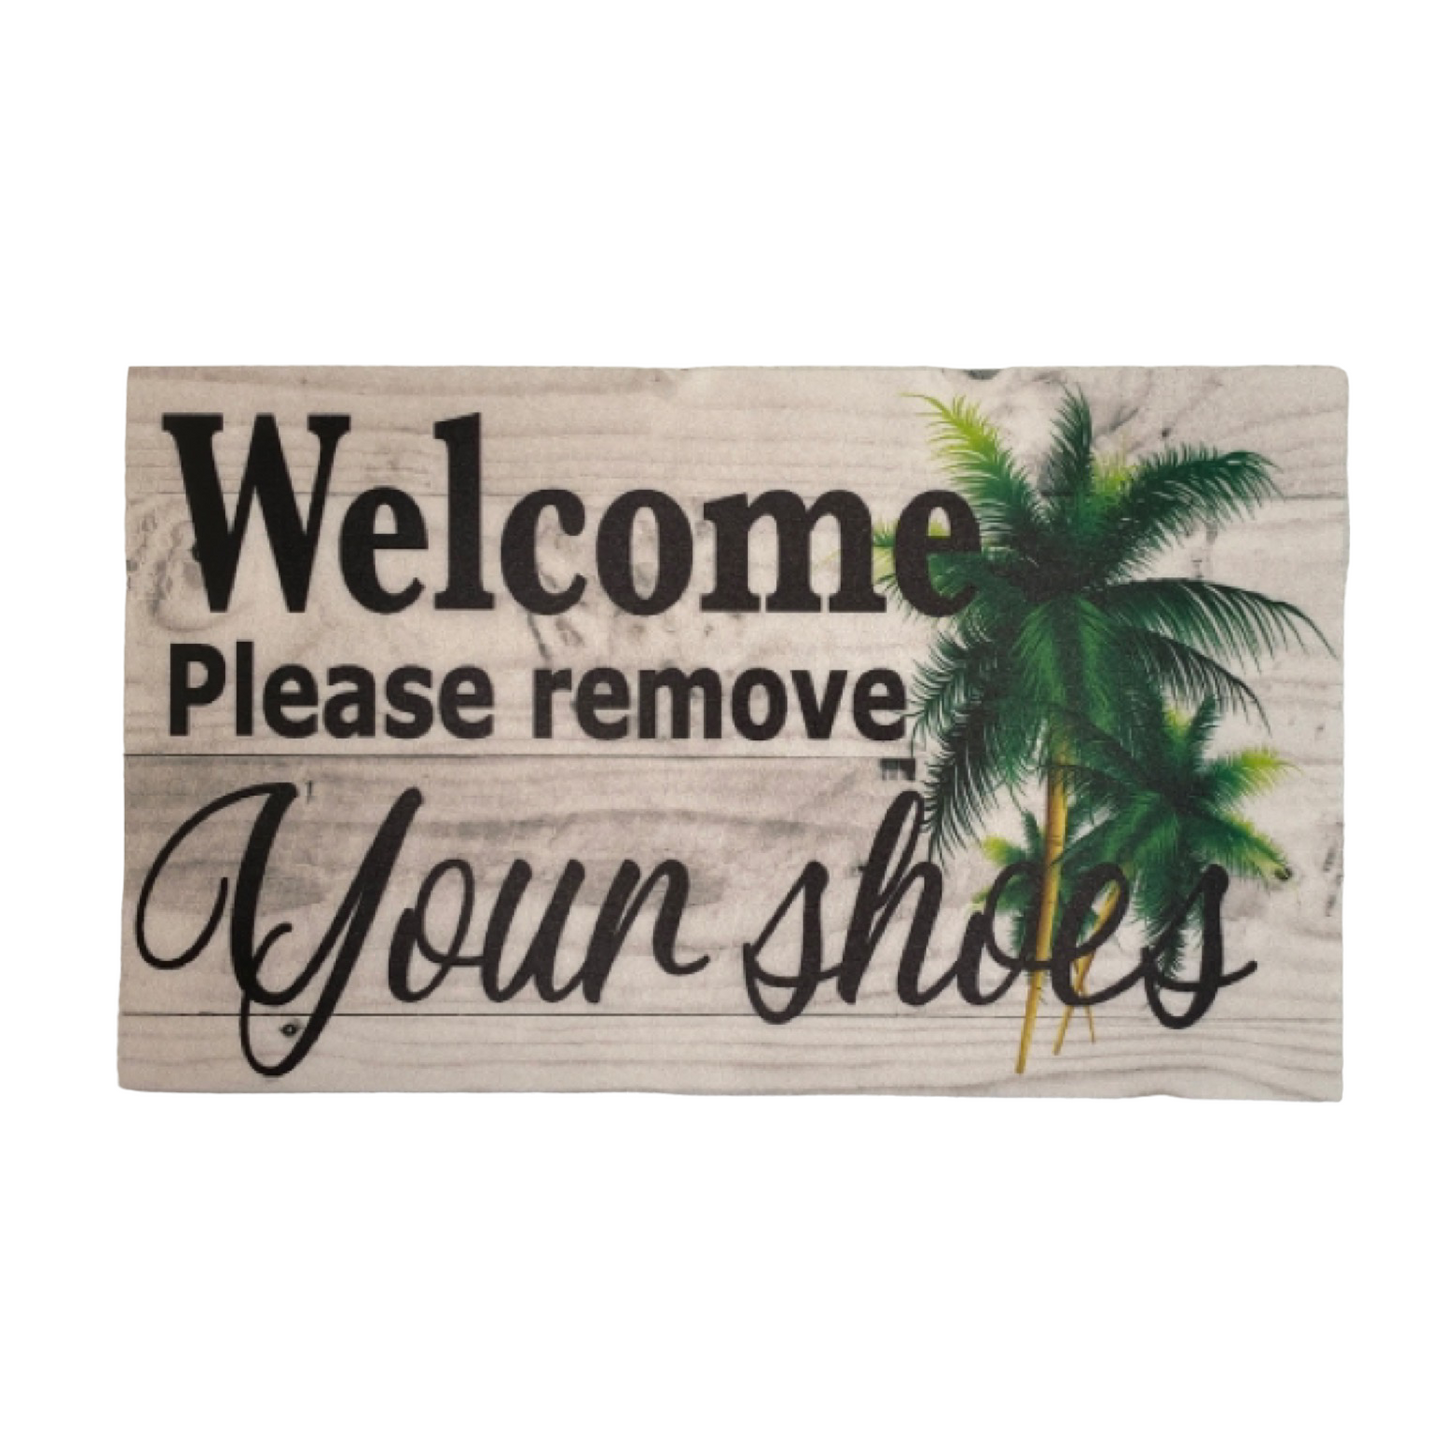 Welcome Remove Shoes with Palm Trees Sign - The Renmy Store Homewares & Gifts 